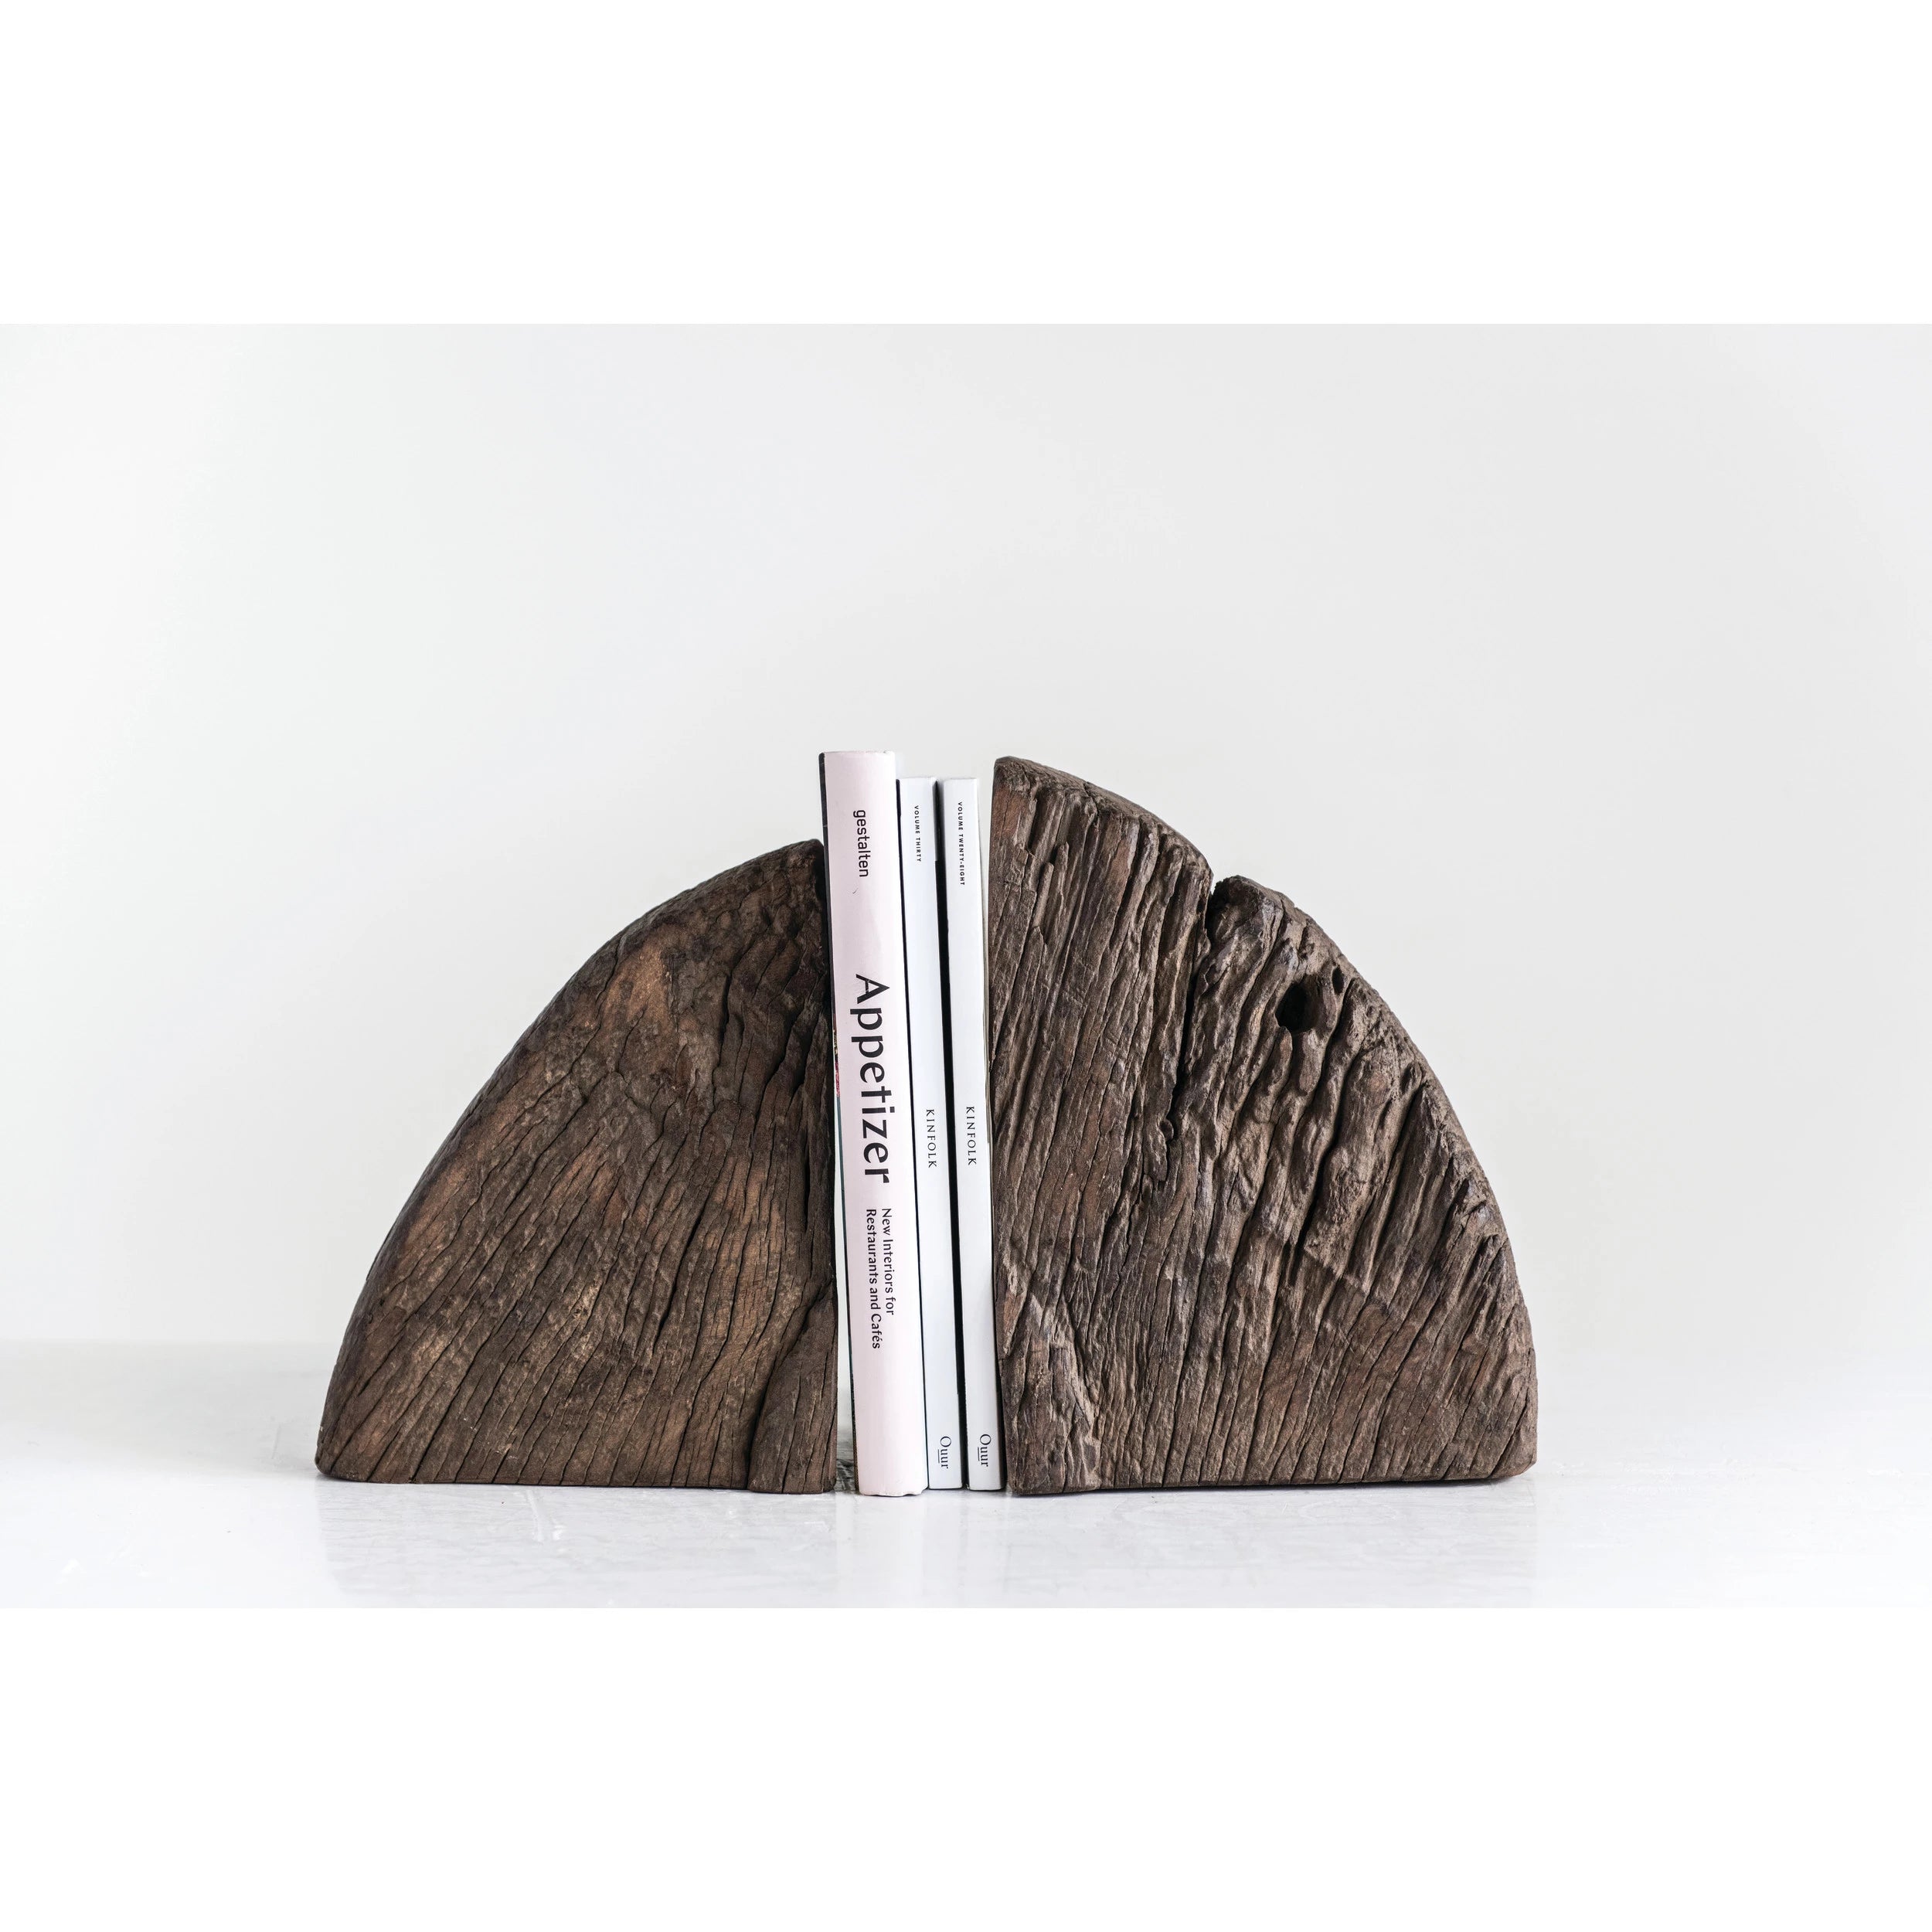 Found Wood Wheel Cog Bookends*